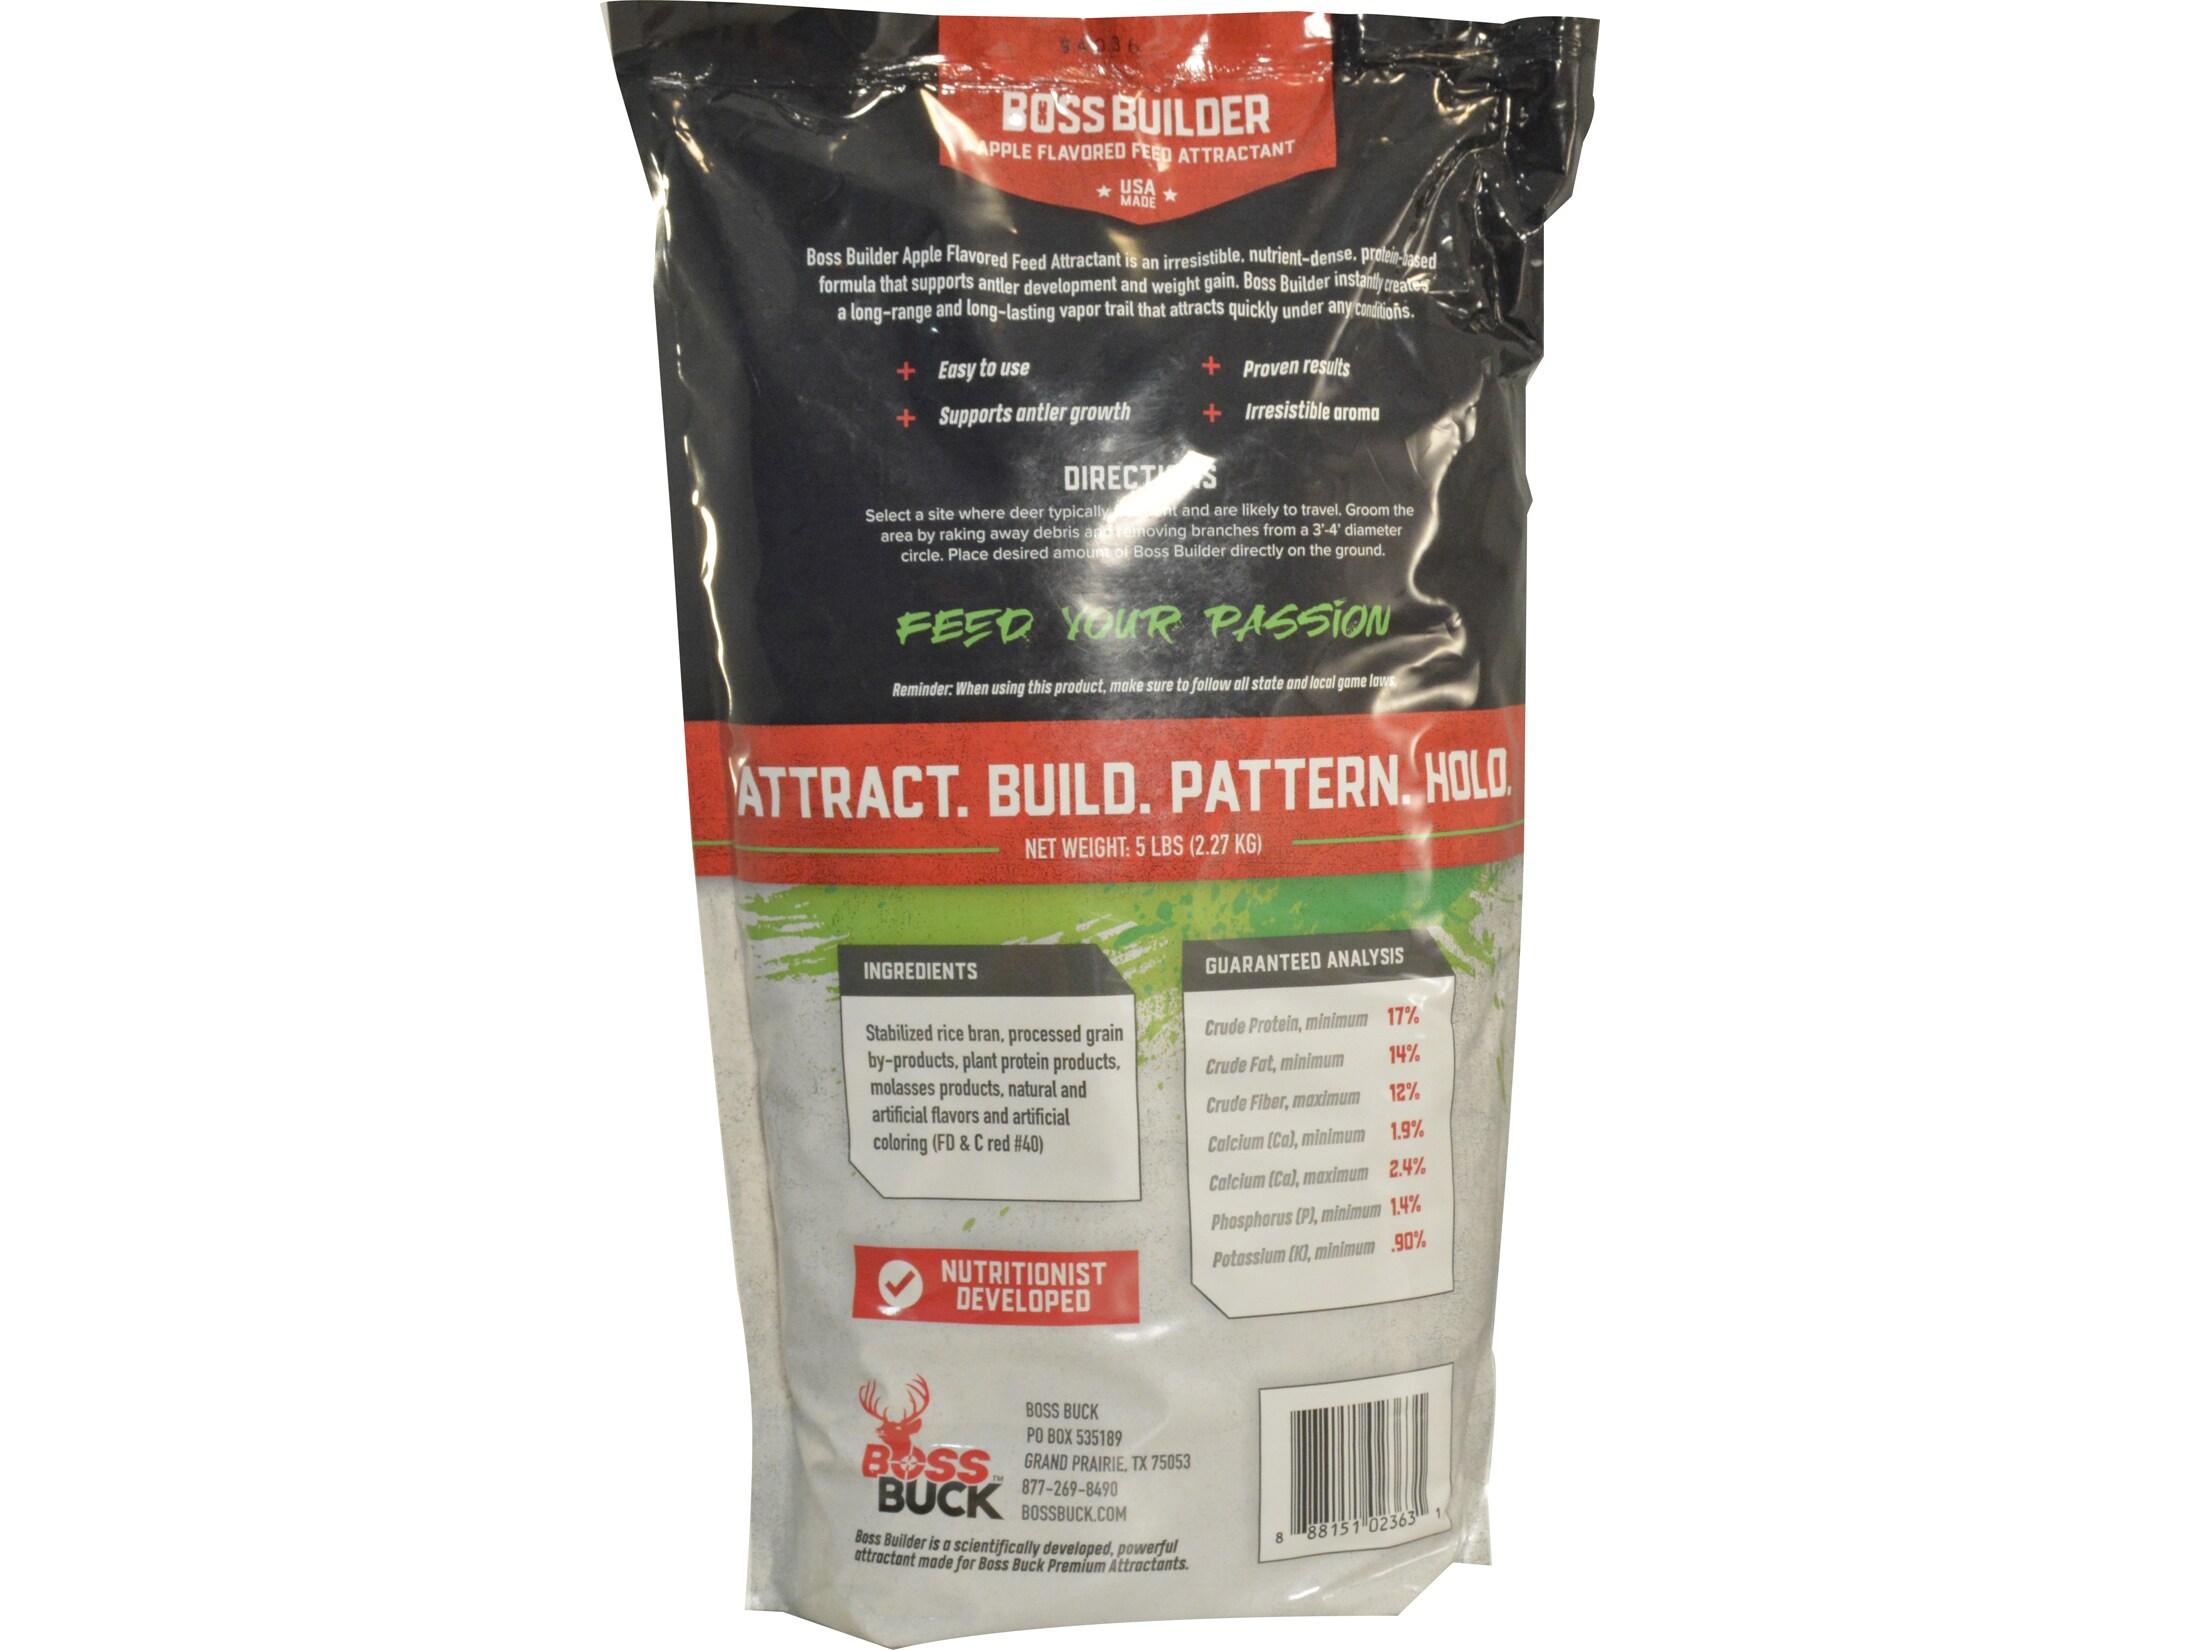 Boss Buck Boss Builder Feed Attractant For Sale